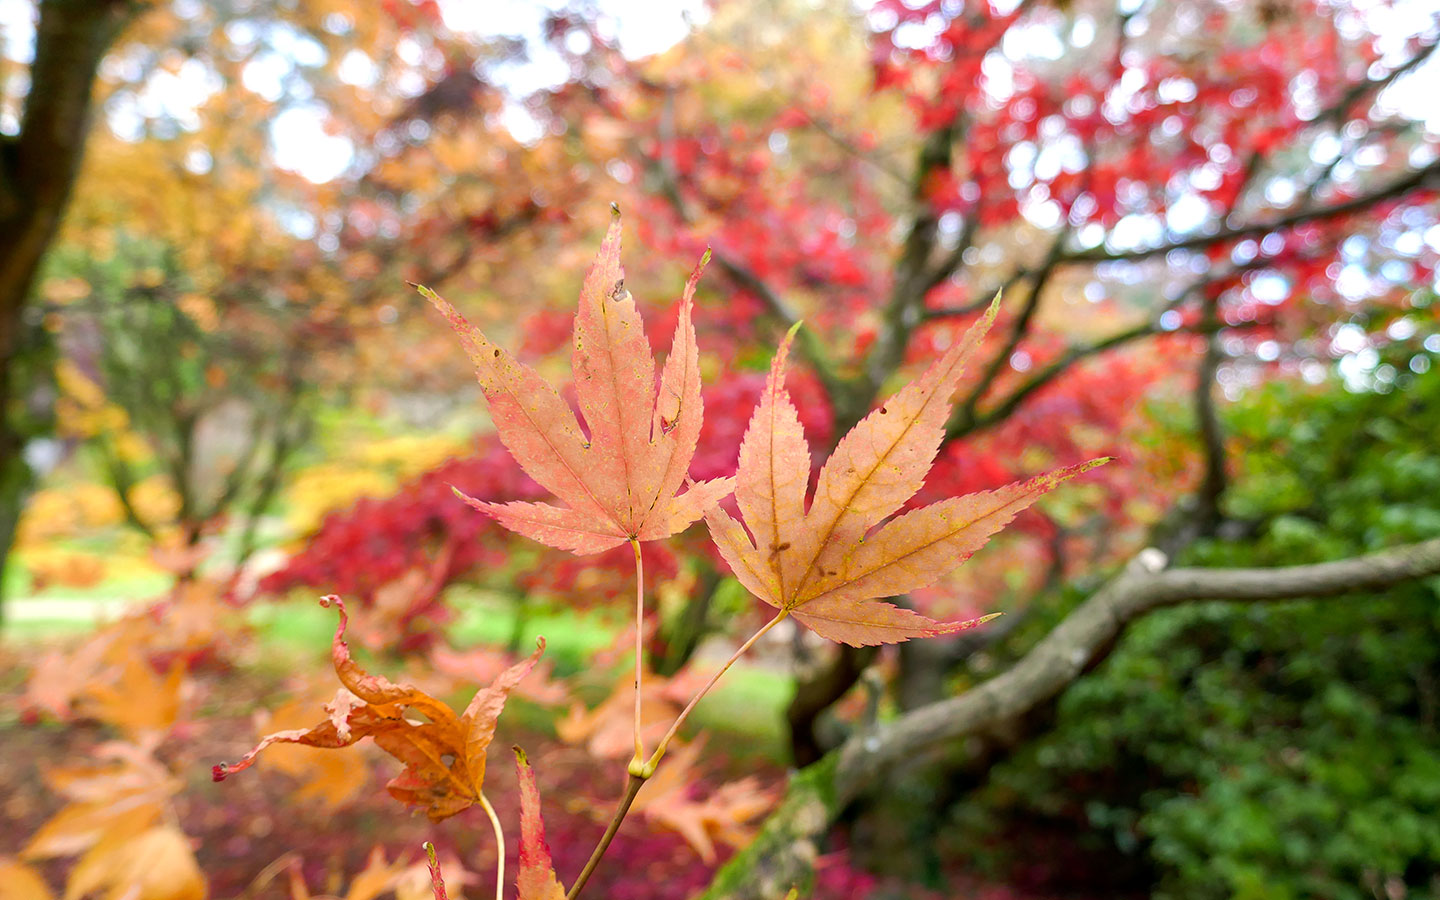 Autumn leaves at Batsford Arboretum in the Cotswolds in November